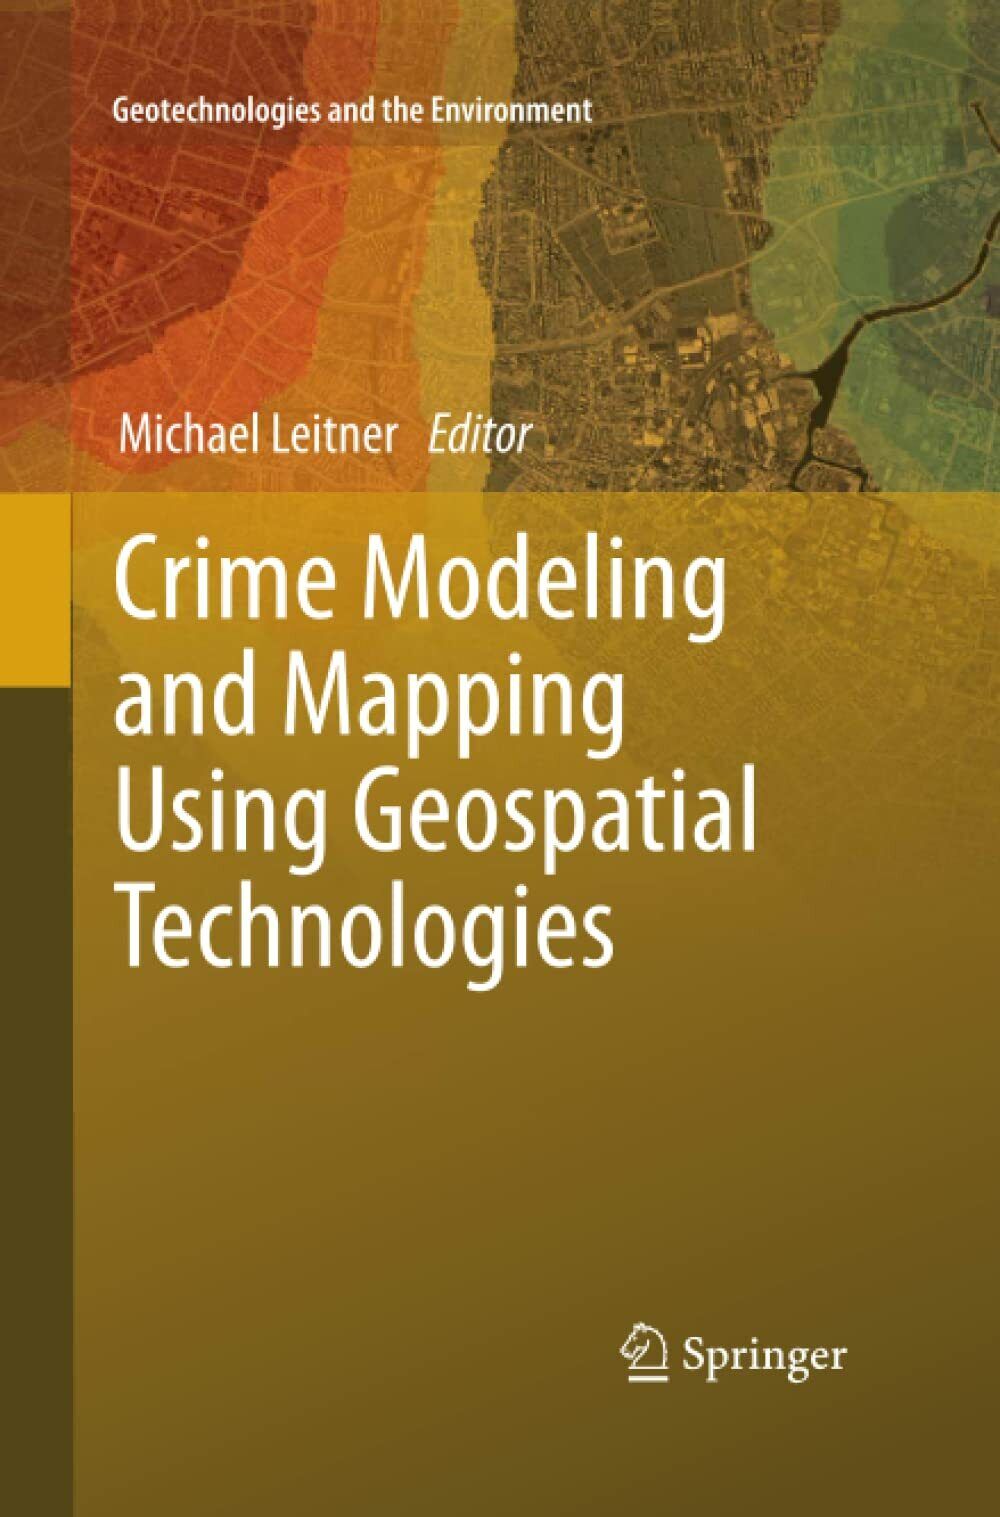 Crime Modeling and Mapping Using Geospatial Technologies - Michael Leitner, 2015 libro usato